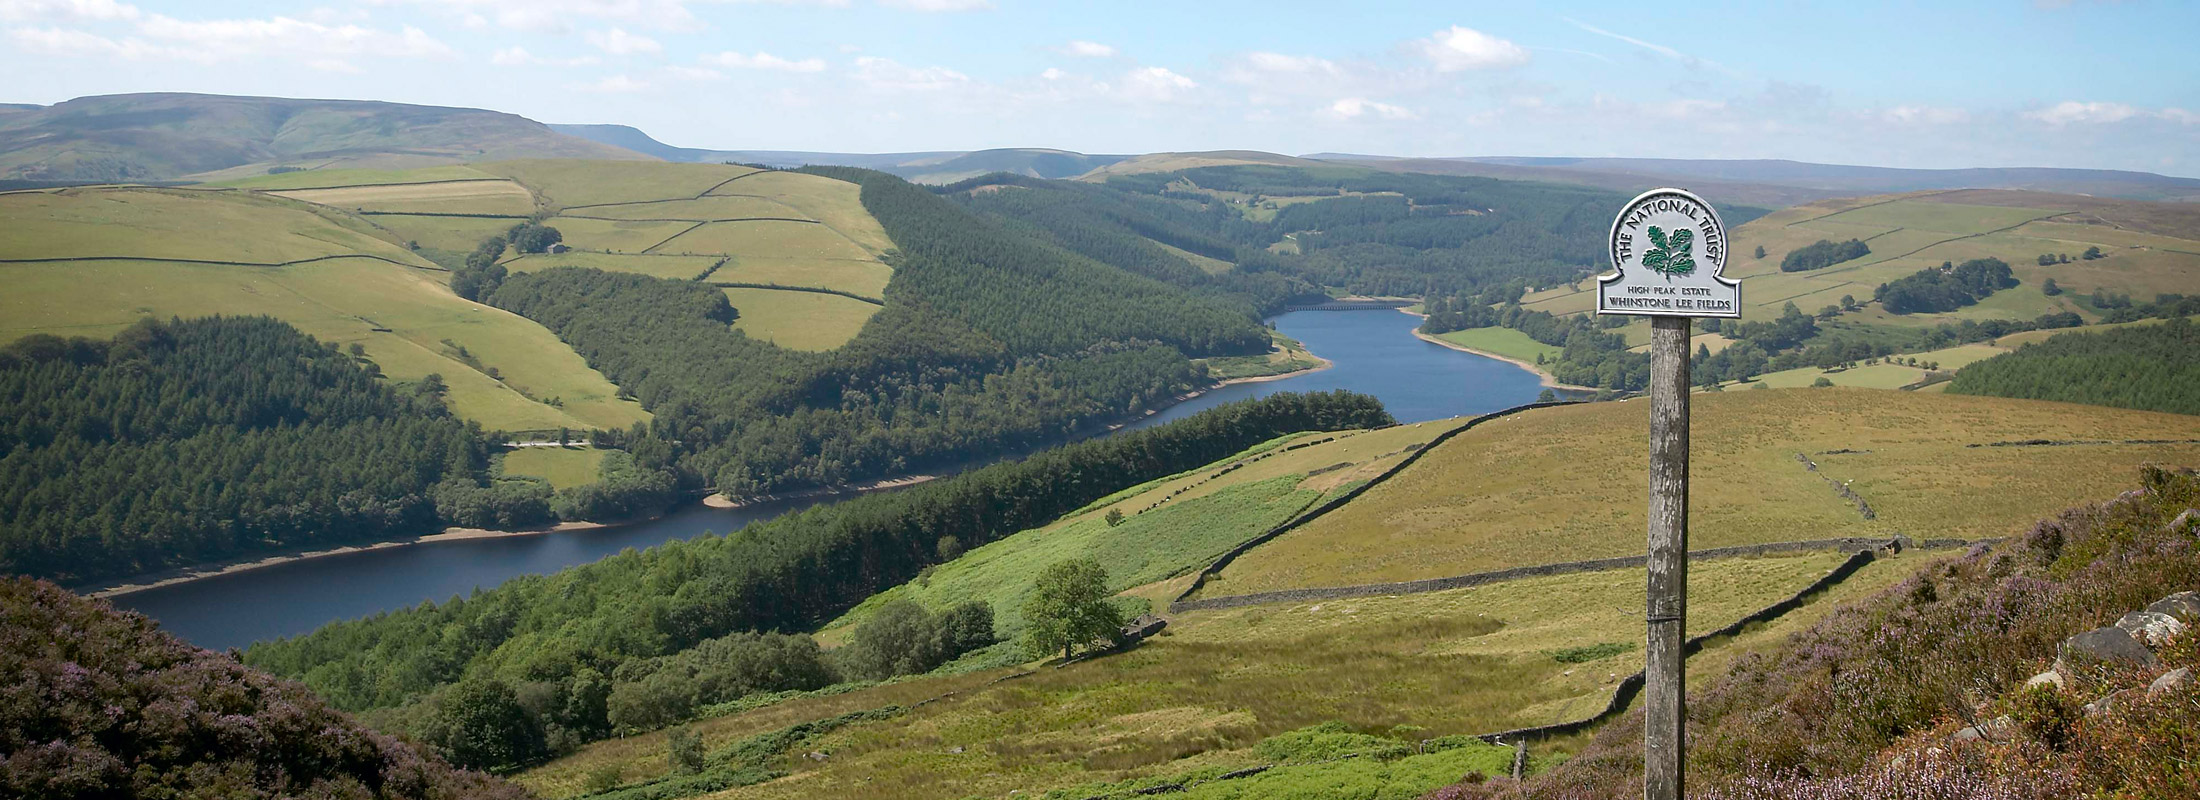 A View of the Peak District